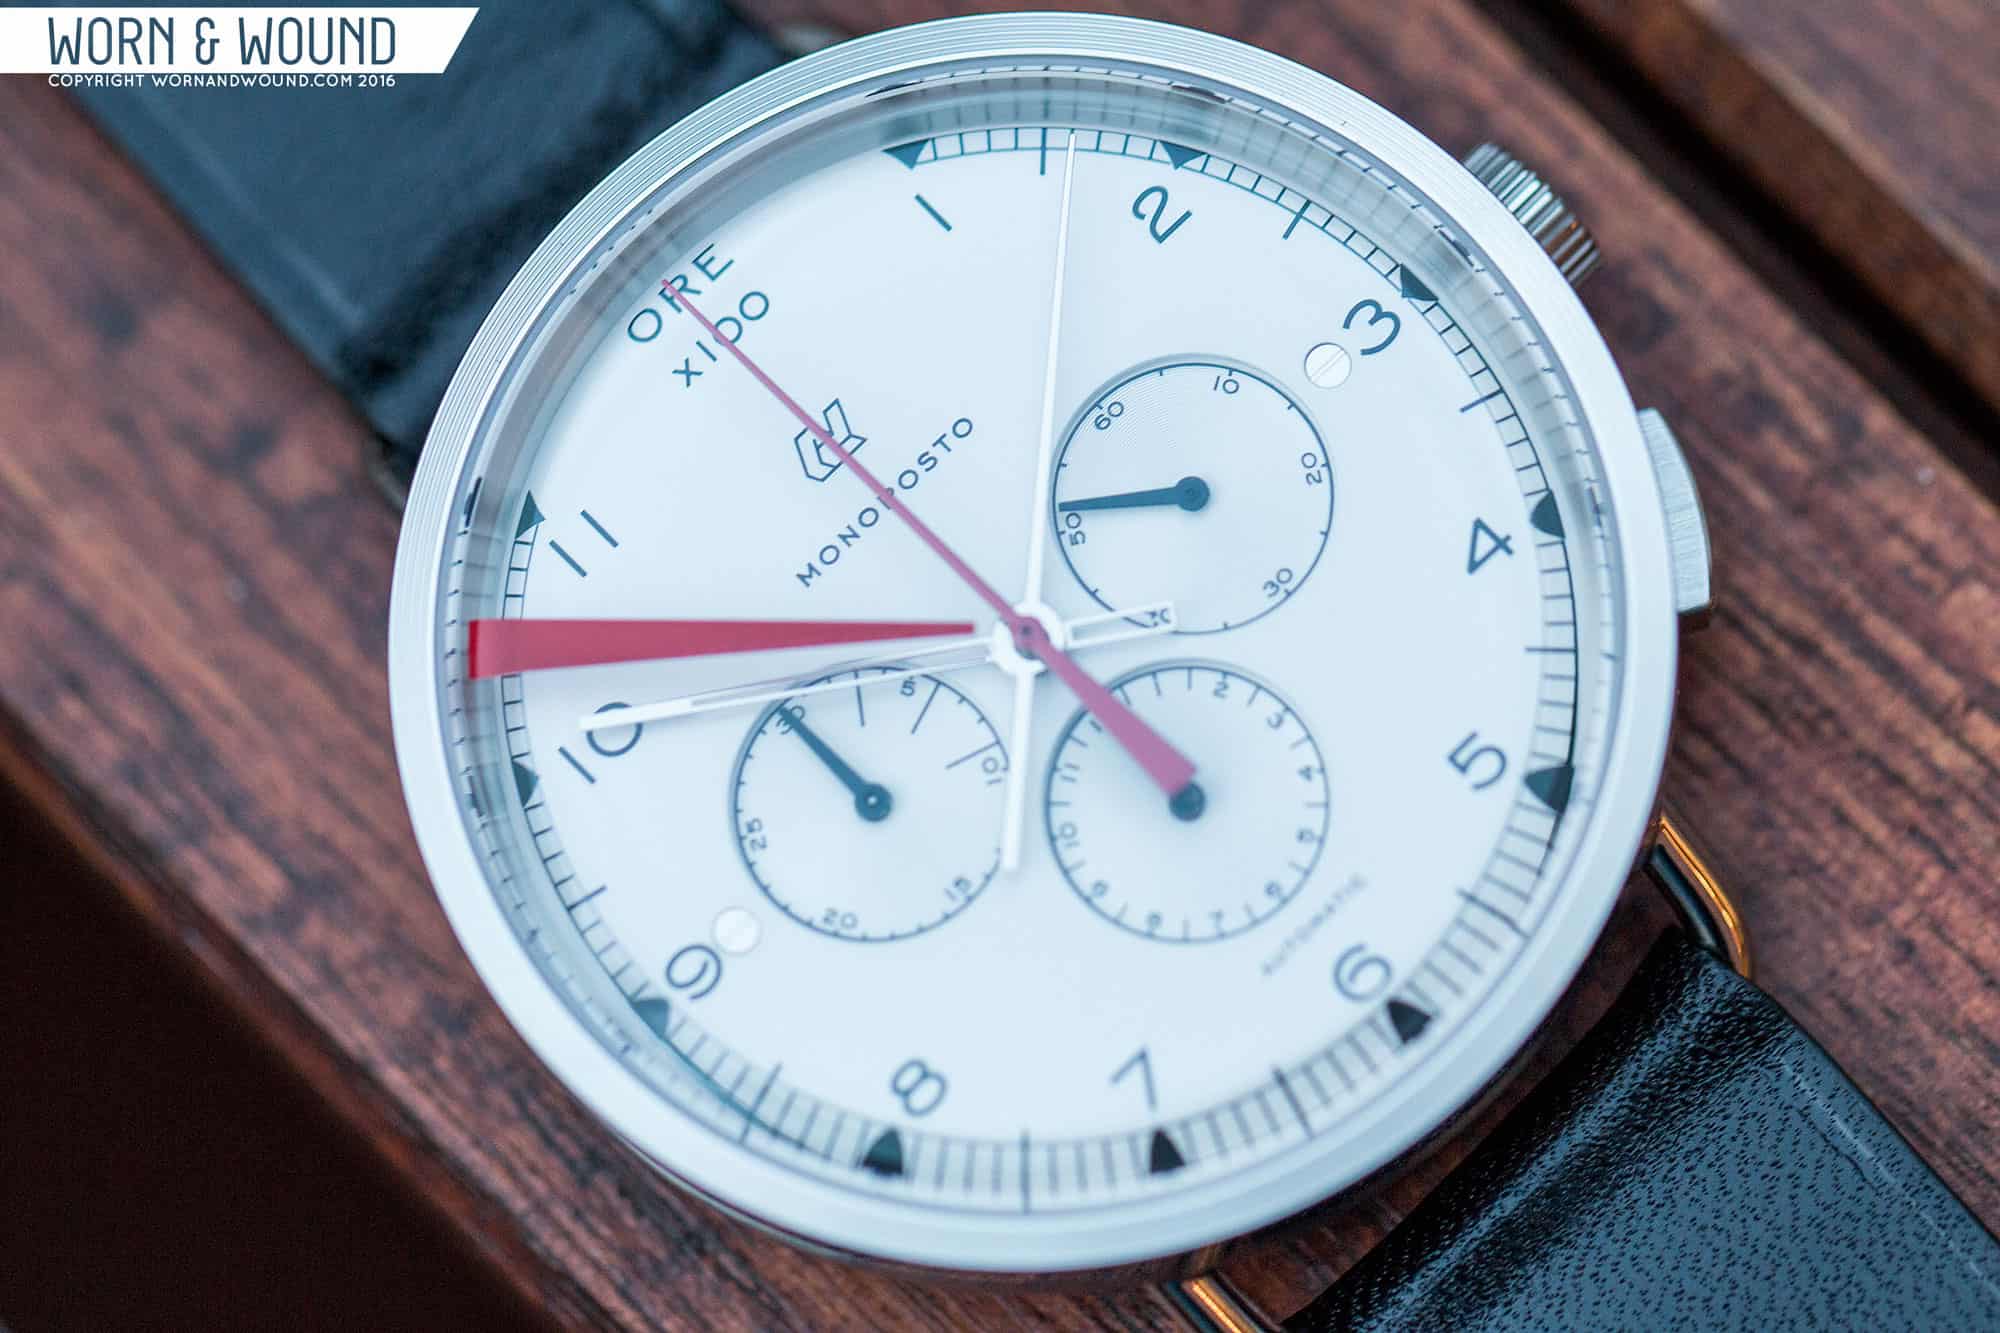 Autodromo Monoposto Chronograph - This Watch Is Inspired by the